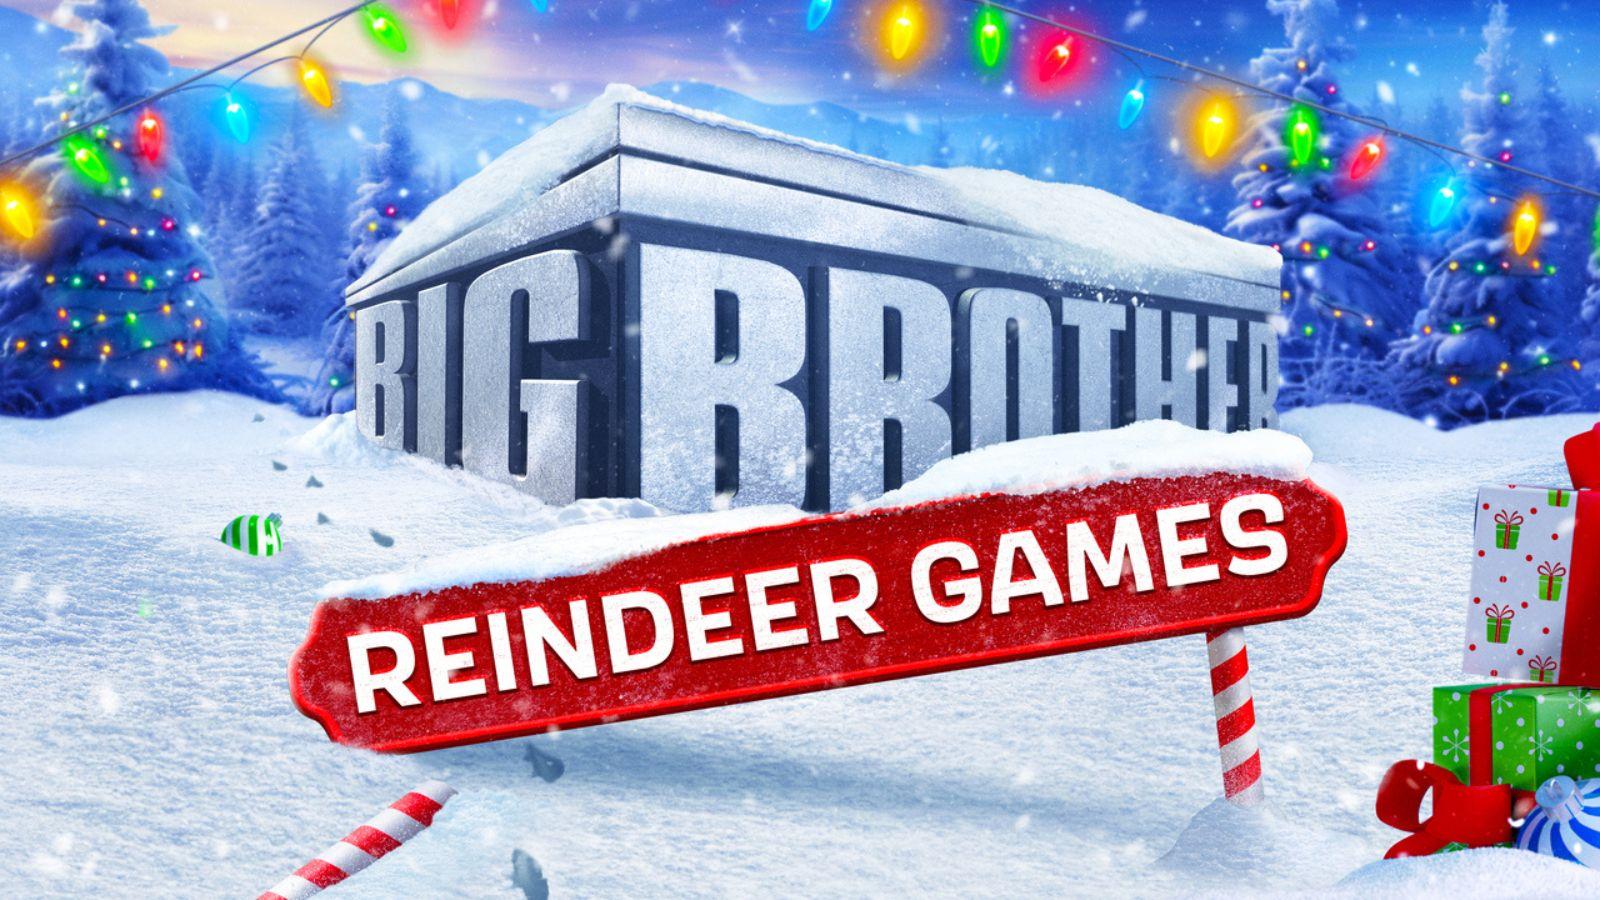 The logo for Big Brother Reindeer Games